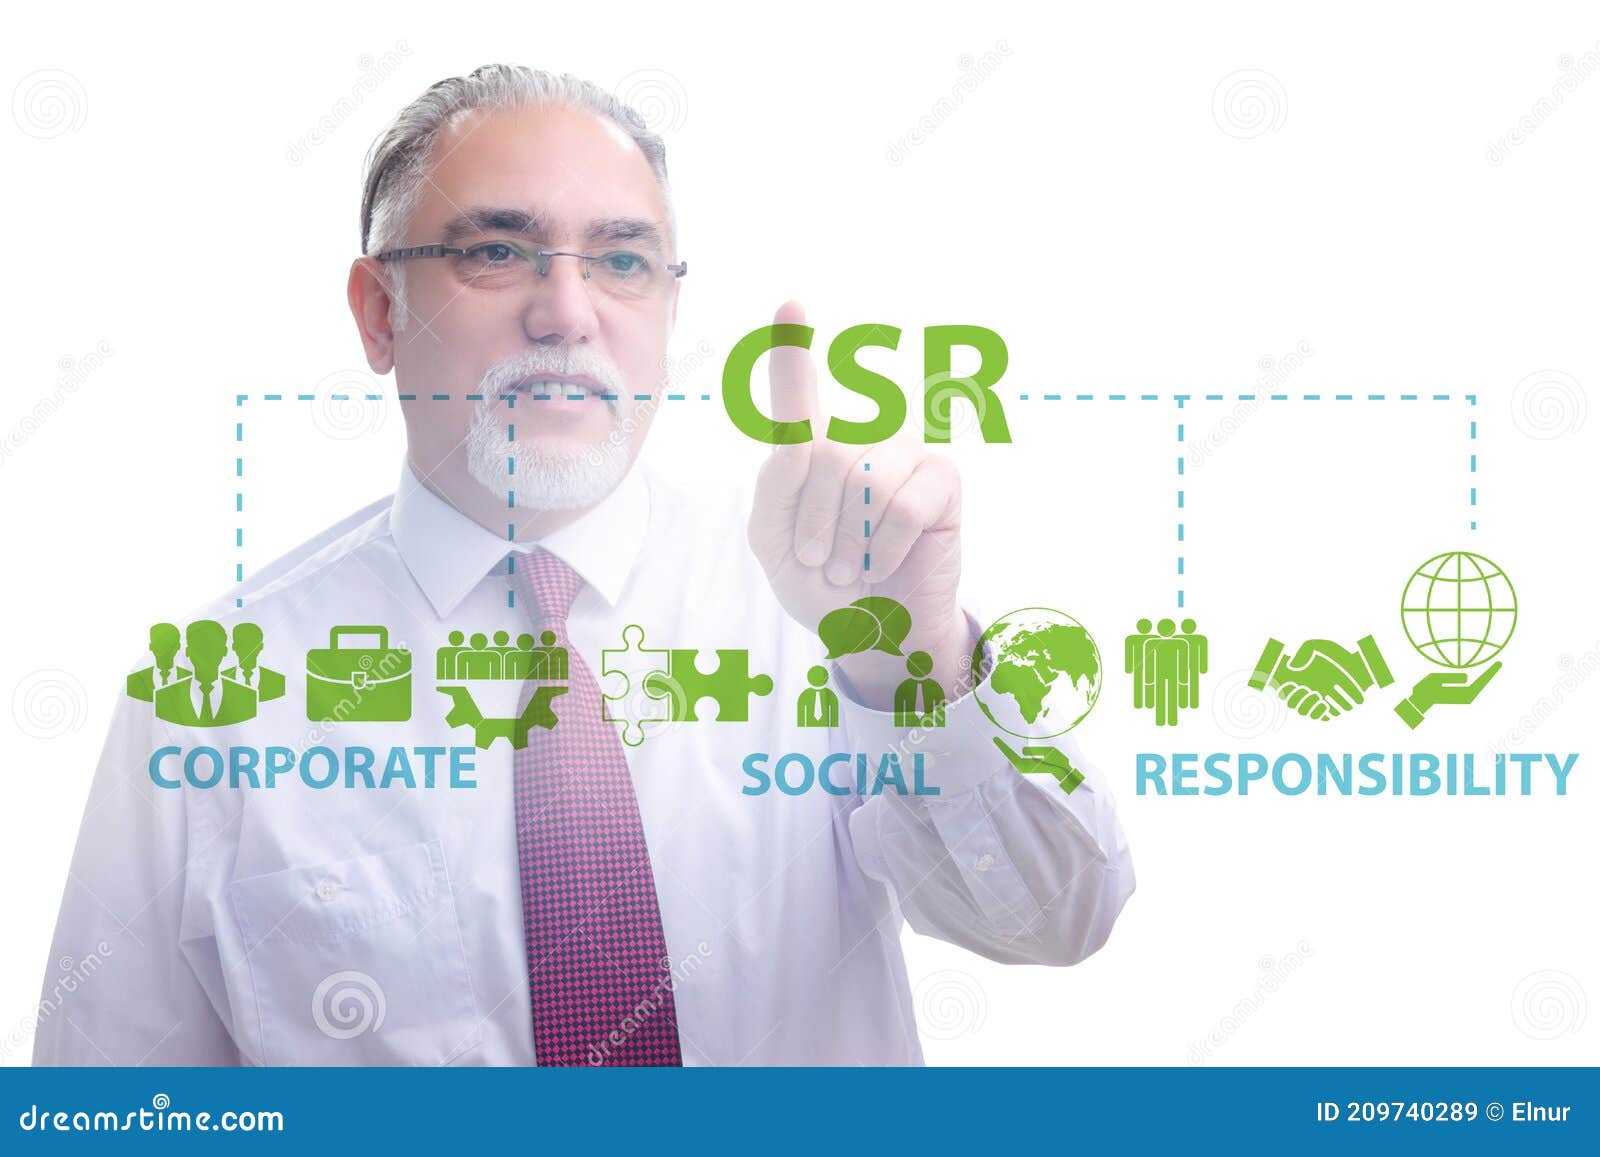 concept of csr - corporate social responsibility with businessma